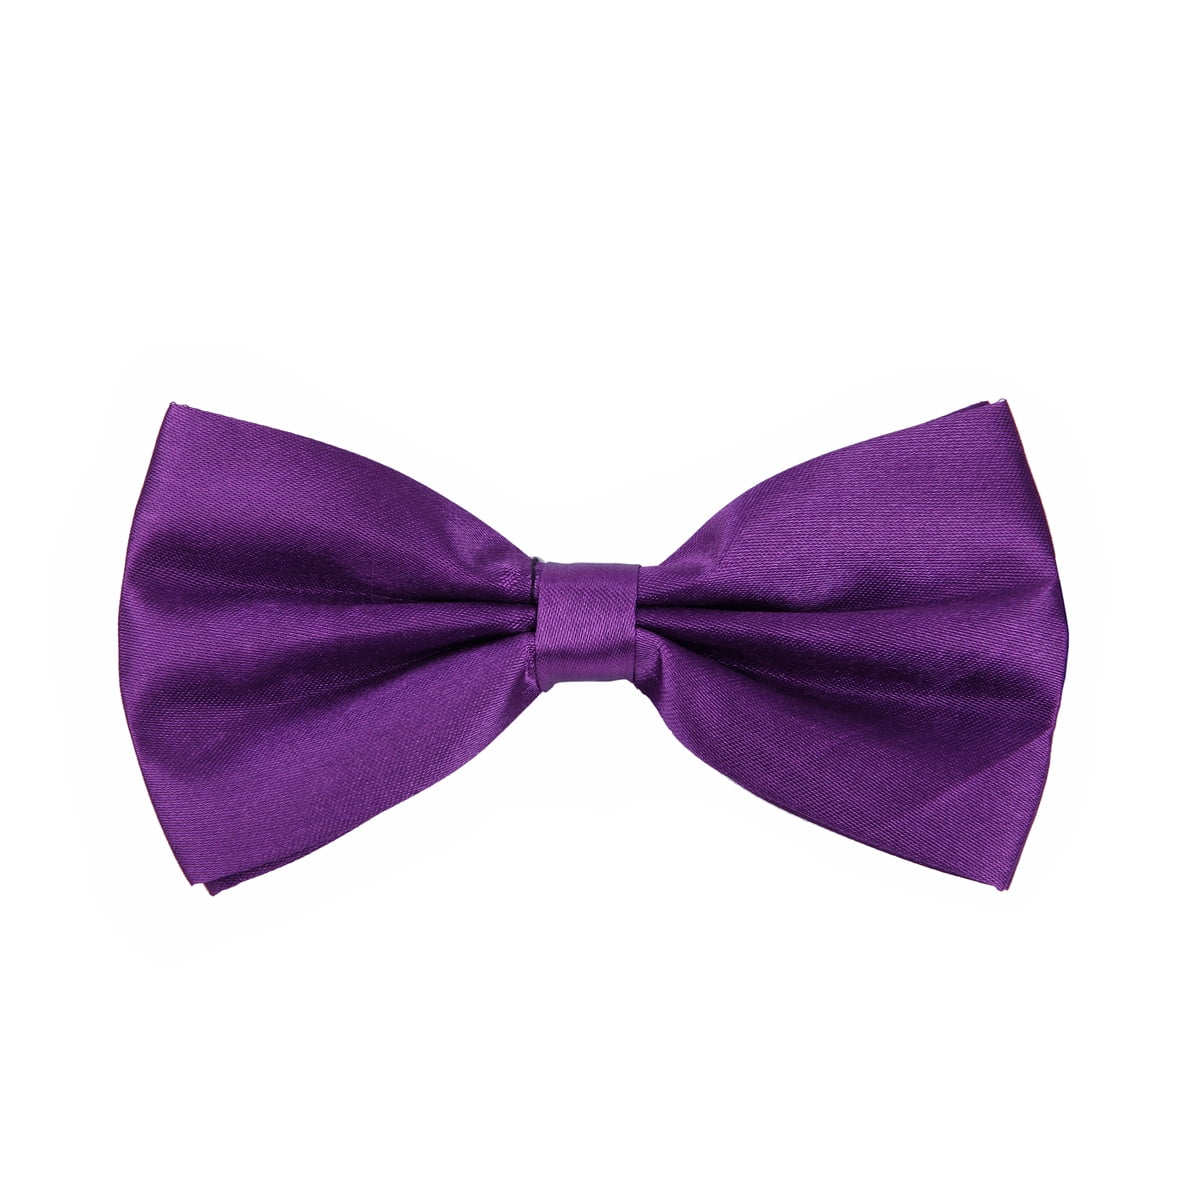 100% SILK BOWTIE Solid LILAC Purple Color Mens Bow Tie for Tuxedo or Suit 